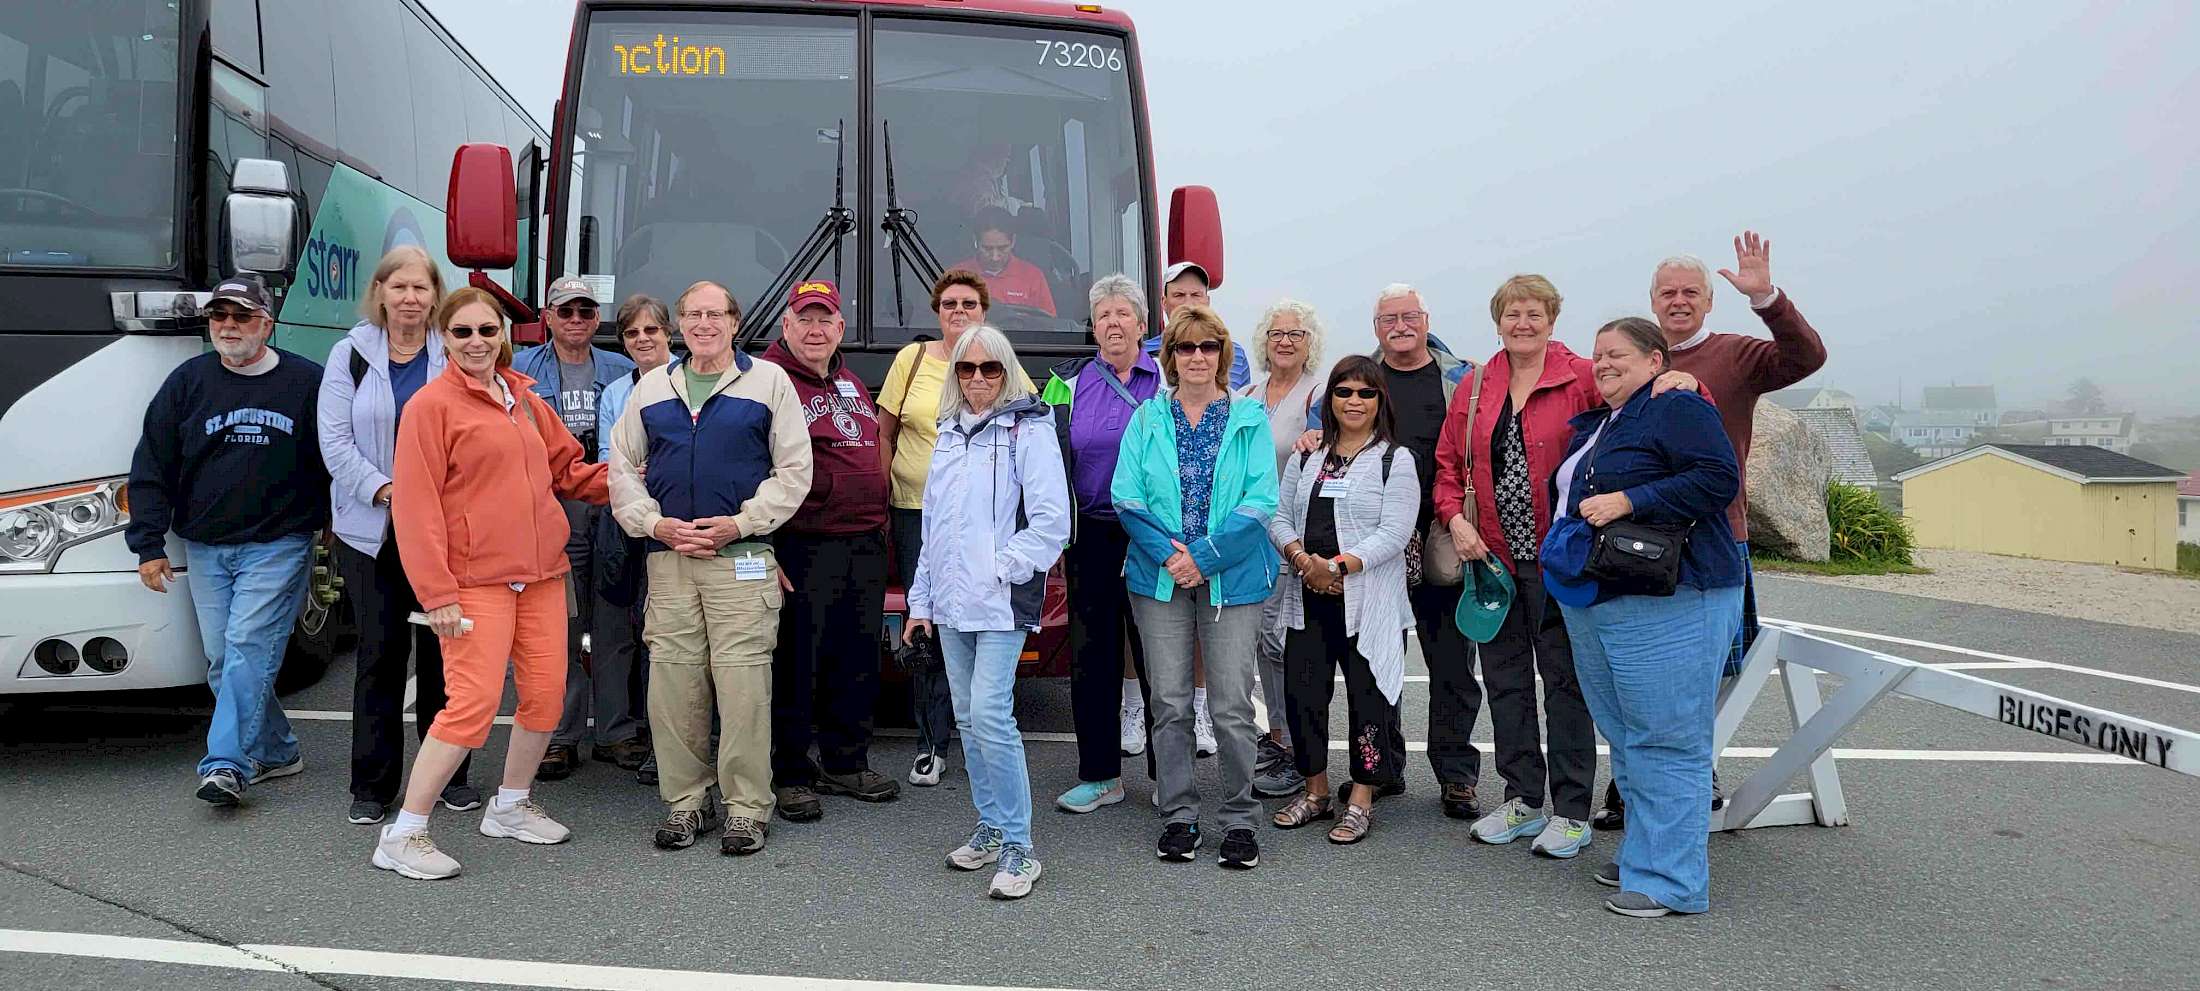 A small group tour in Nova Scotia. A great way to make new friends and deeply experience your destination.